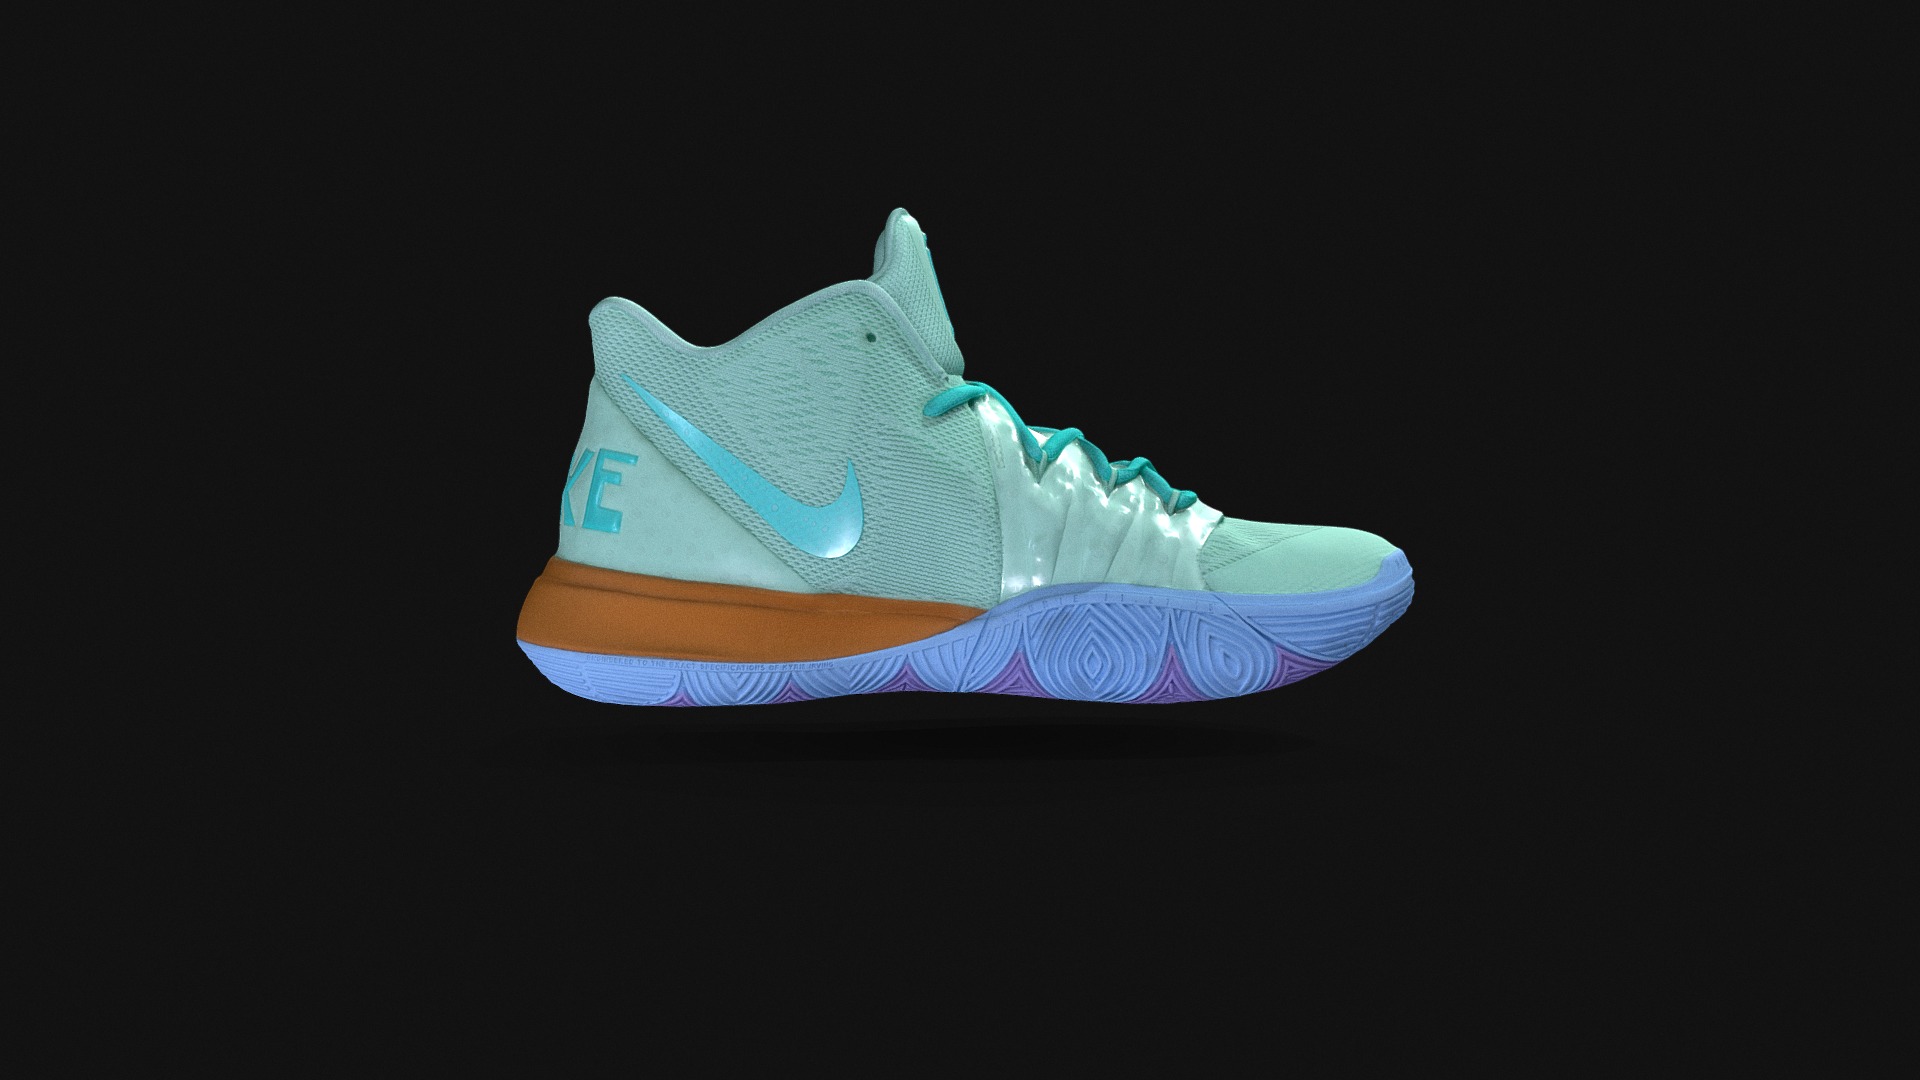 3D model Nike Kyrie 5 Squidward - This is a 3D model of the Nike Kyrie 5 Squidward. The 3D model is about a blue and white shoe.